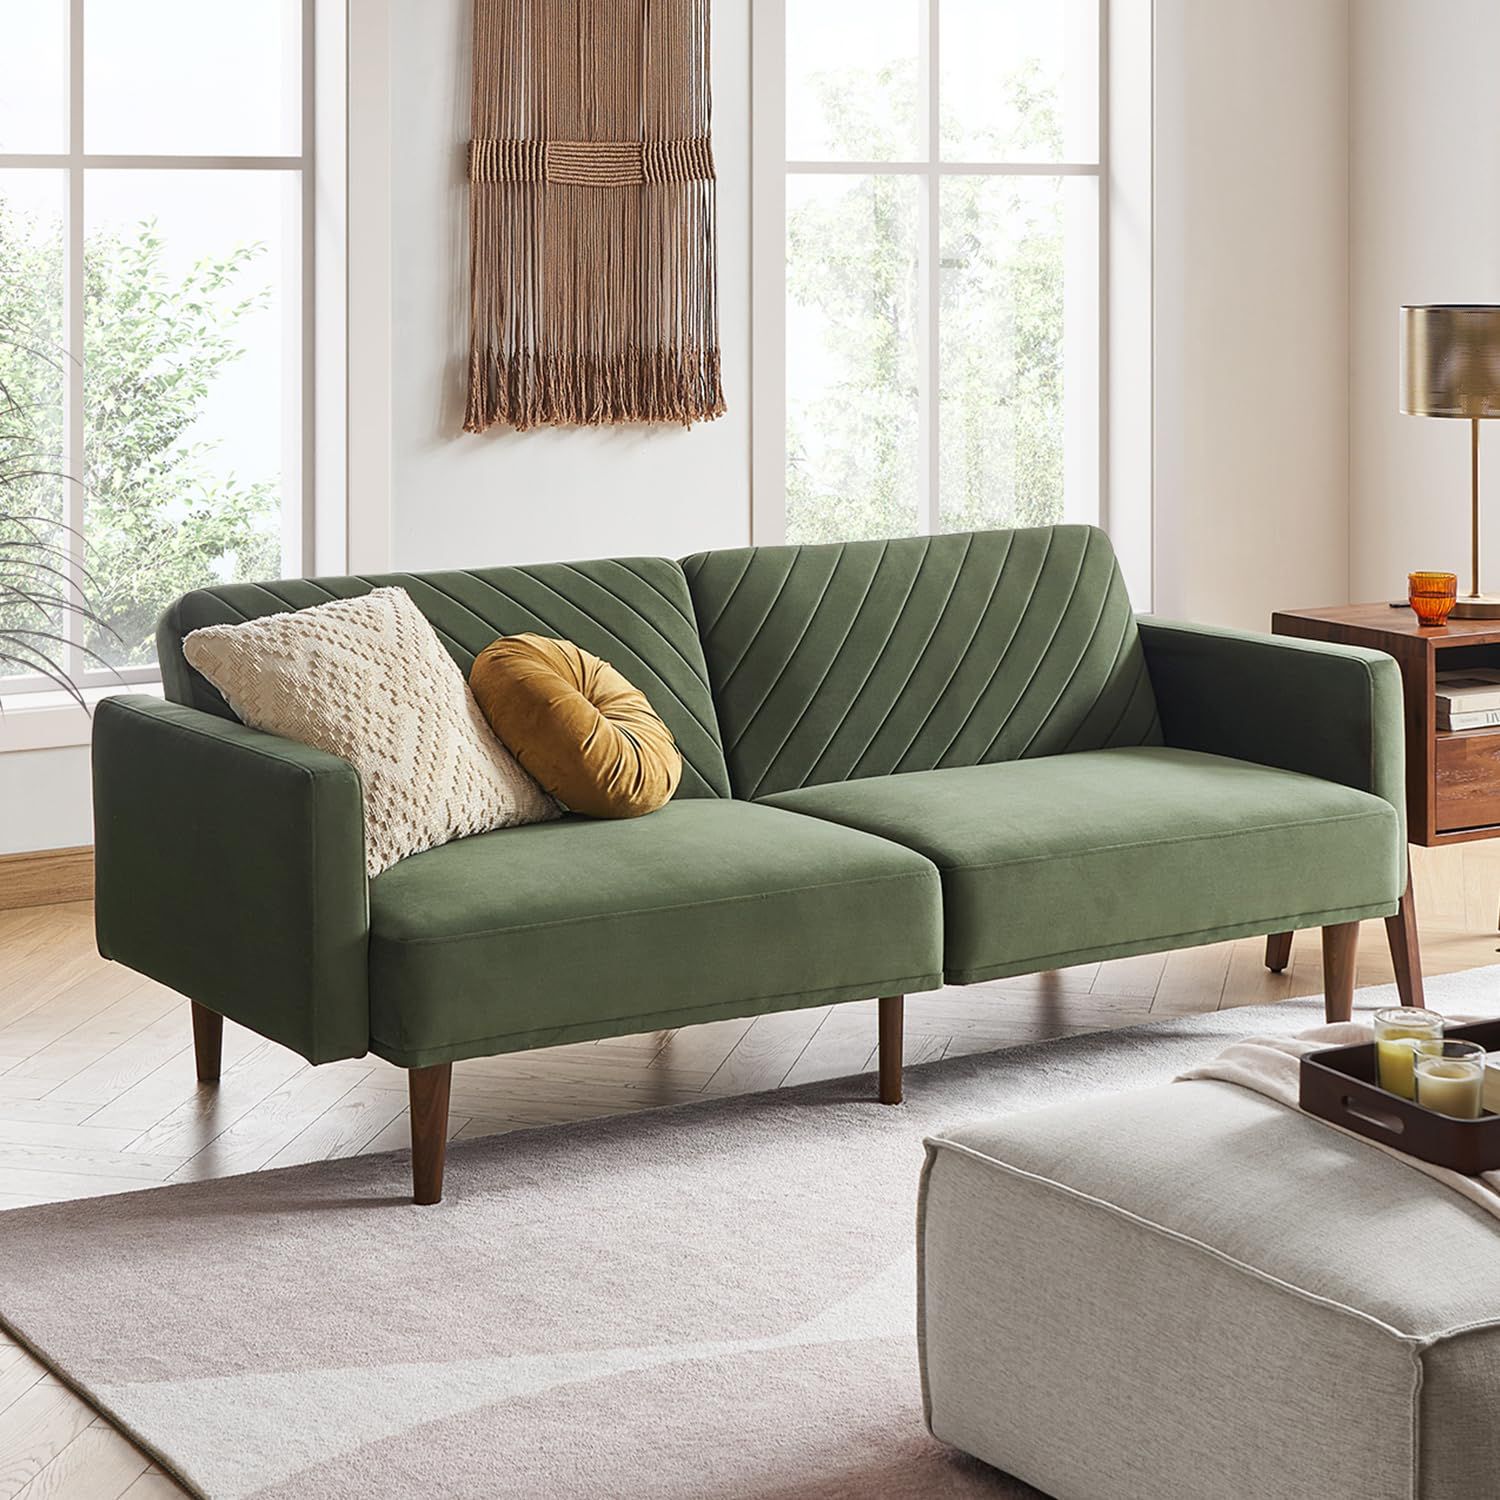 The Versatile Appeal of Sleeper Loveseats: A Compact and Comfortable Seating Solution